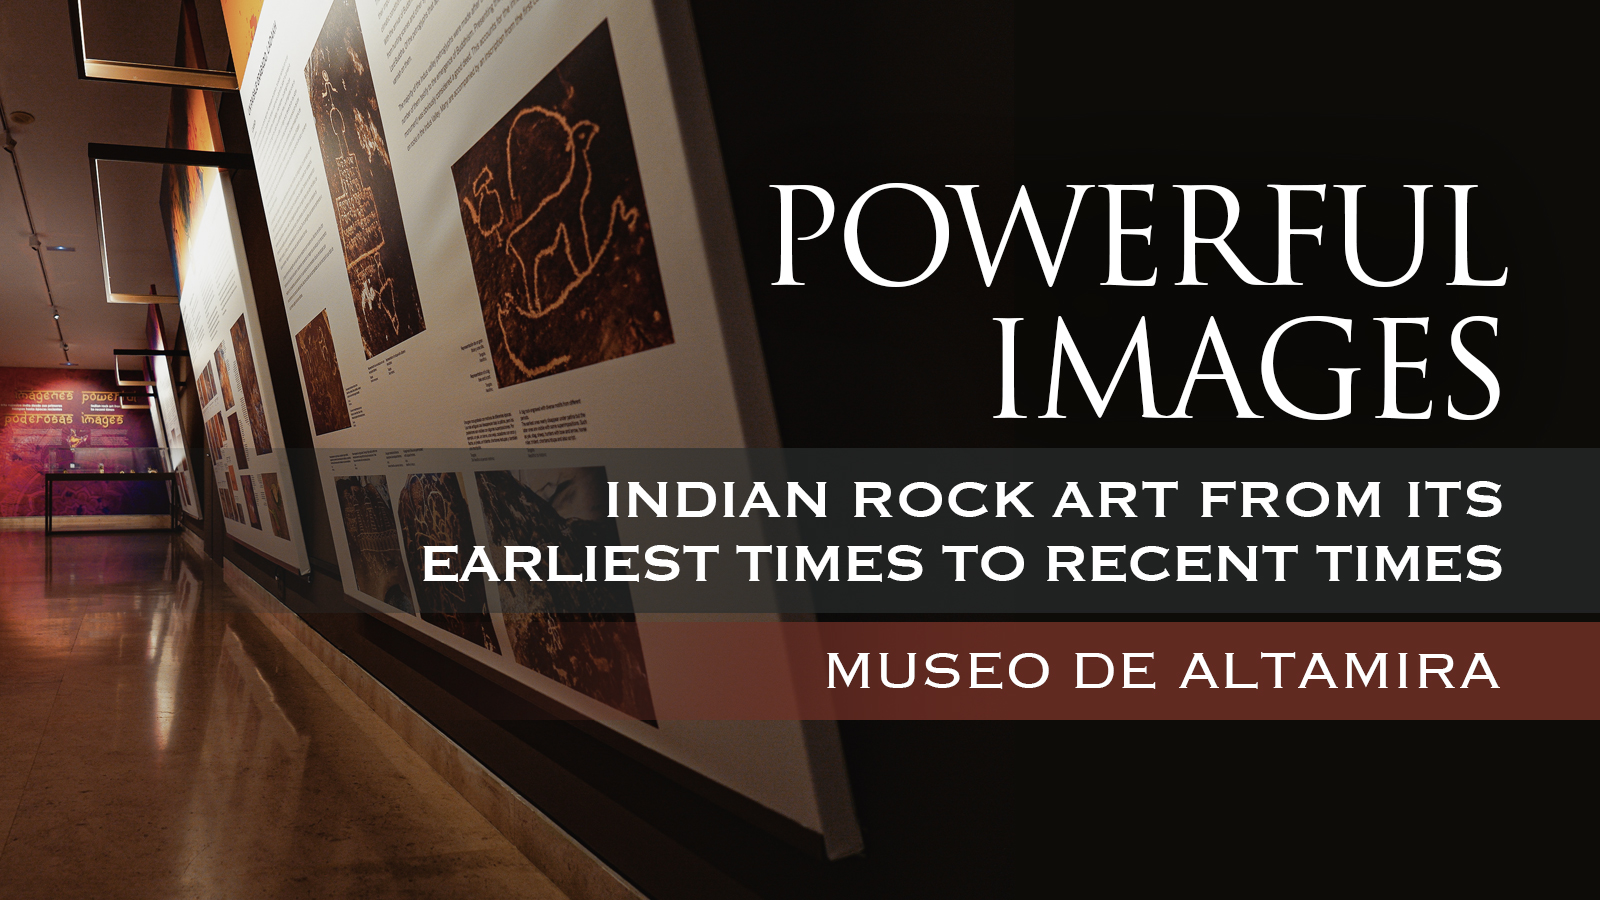 Powerful Images - Indian rock art from its earliest times to recent times